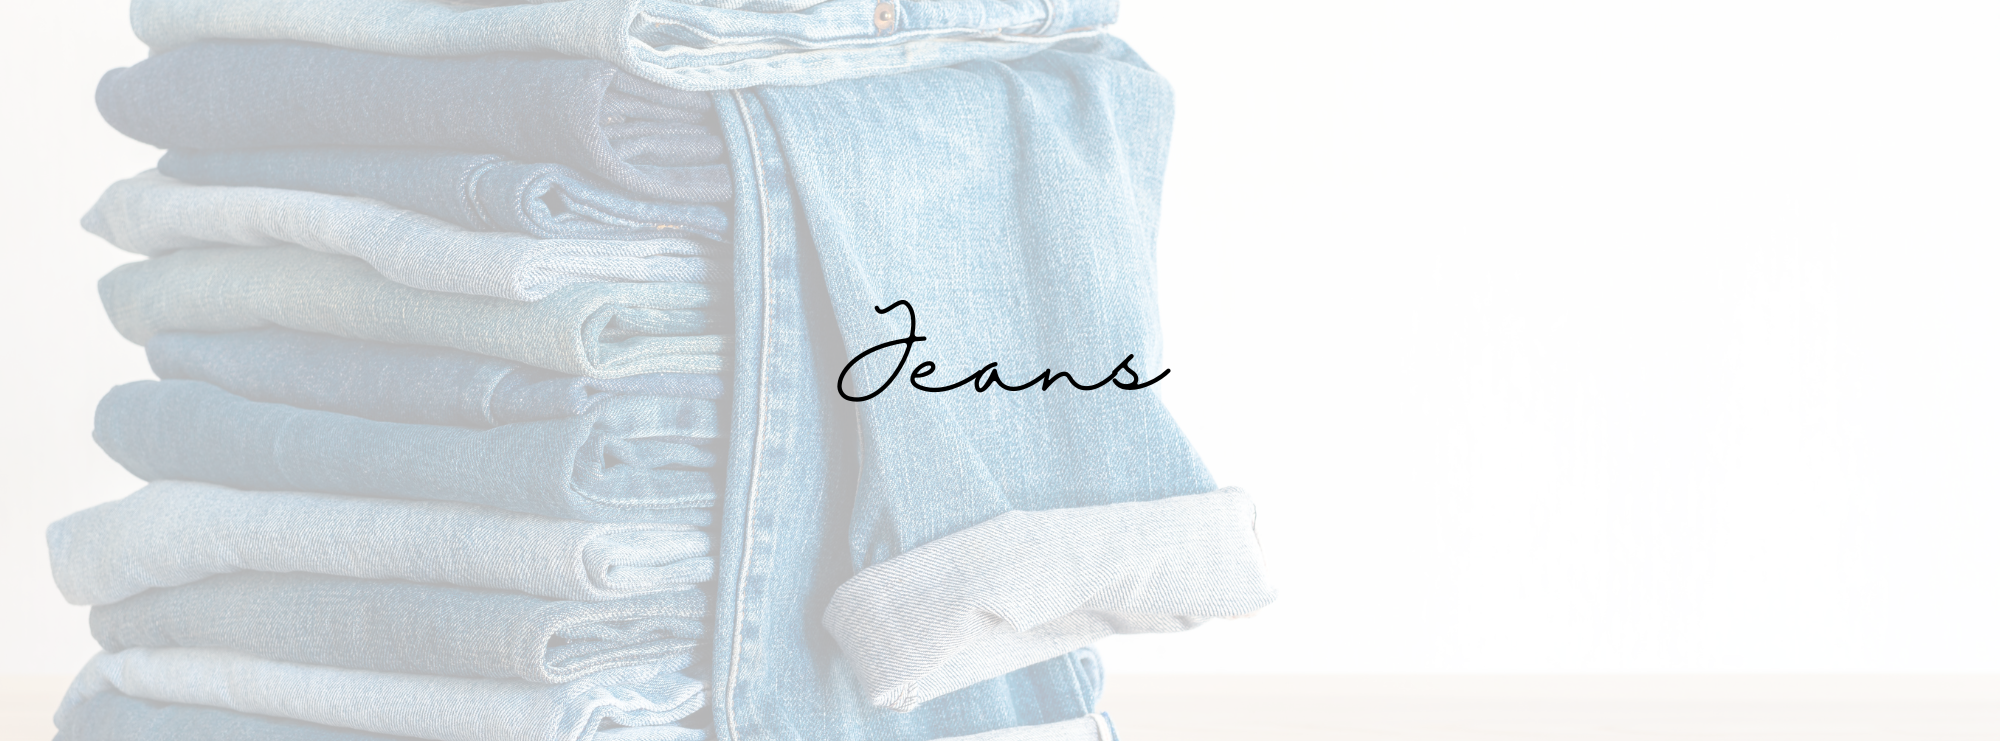 Jeans: